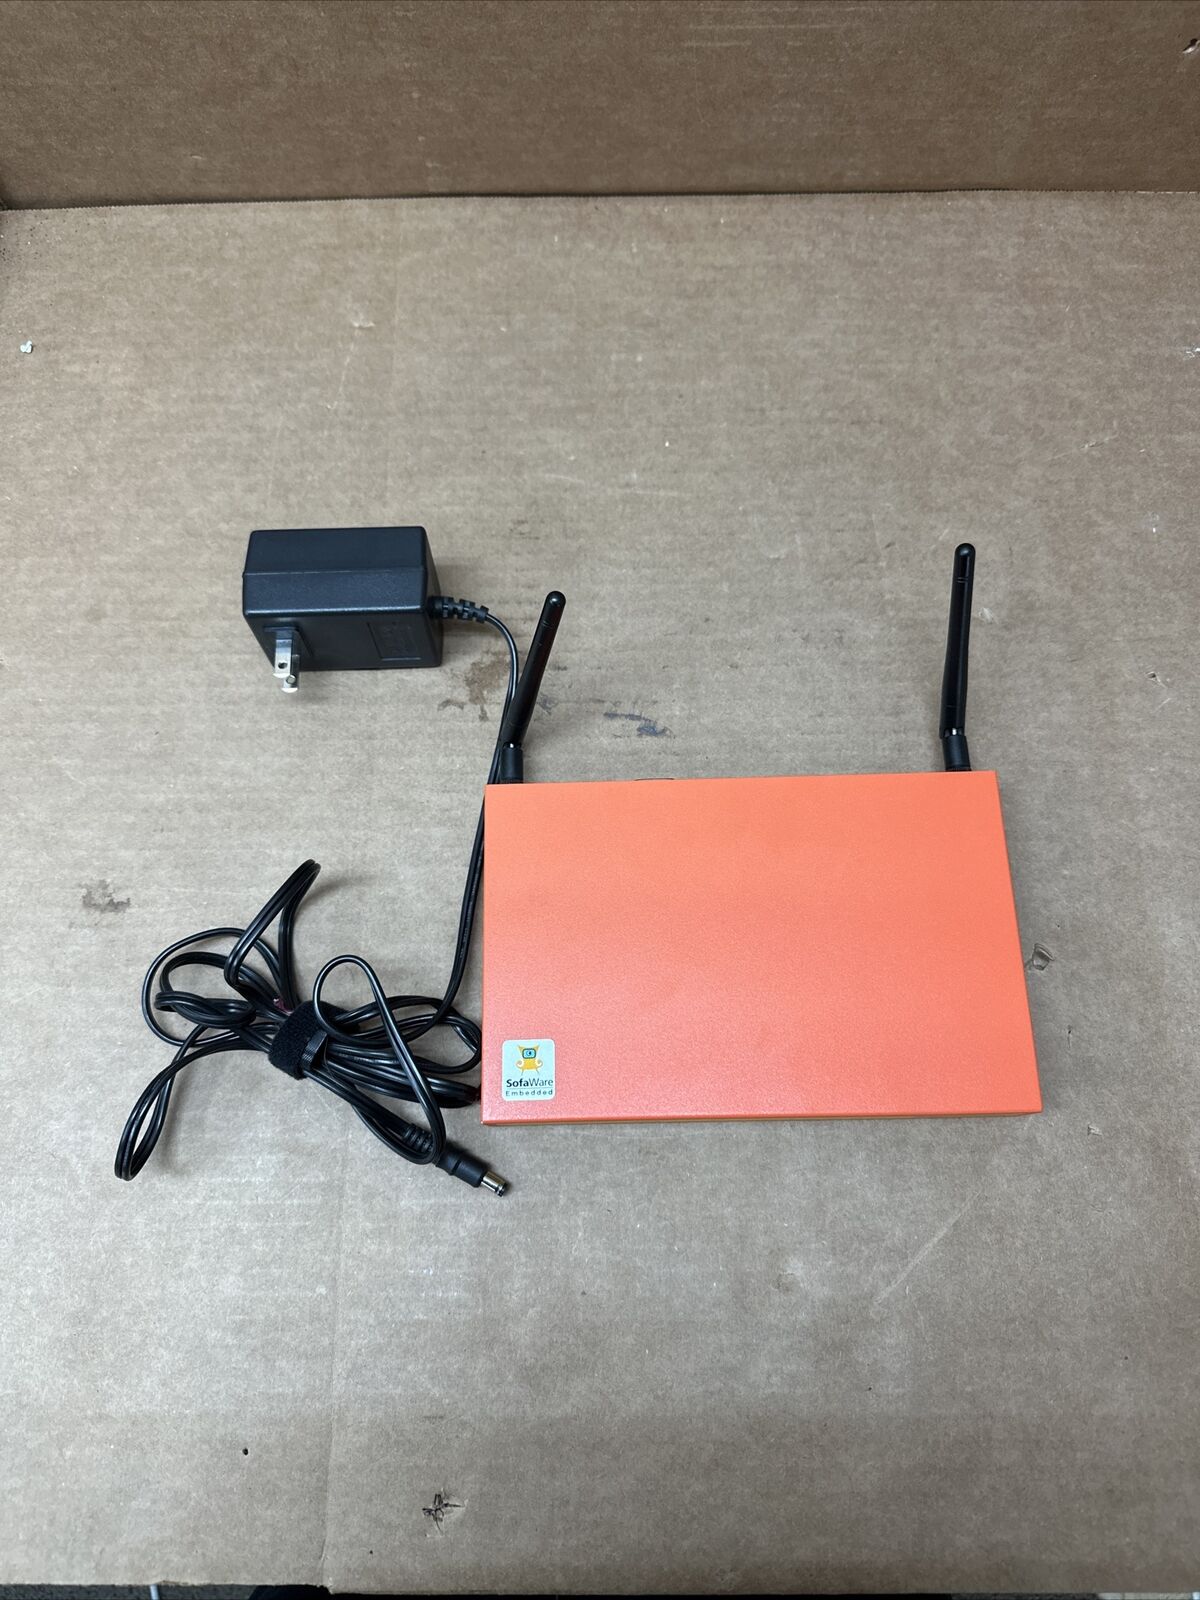 Check Point Safe@Office 400W Series Firewall Router Security SBXW-166LHGE-4  VPN